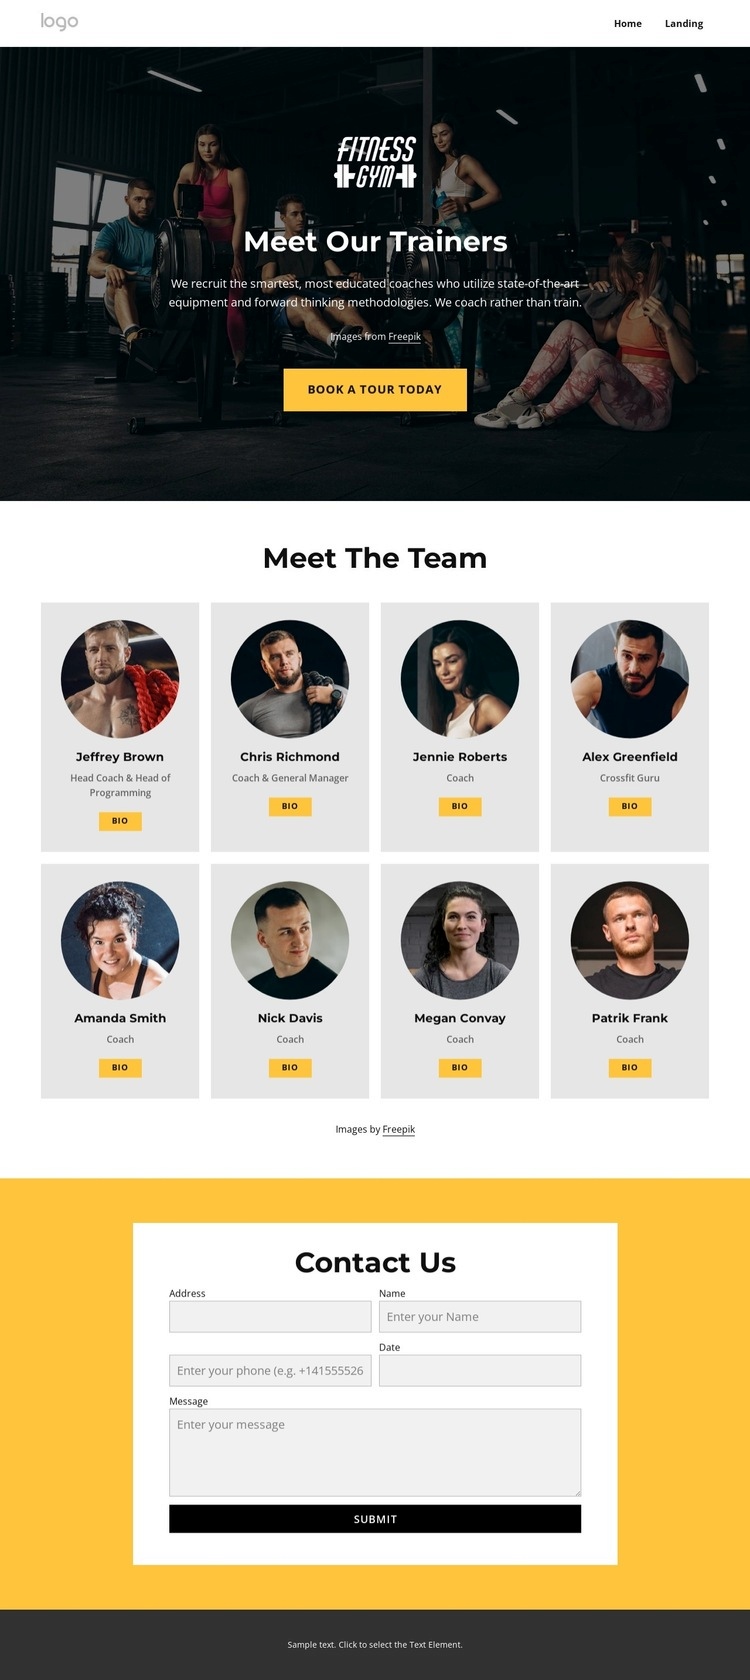 Meet our trainers Webflow Template Alternative